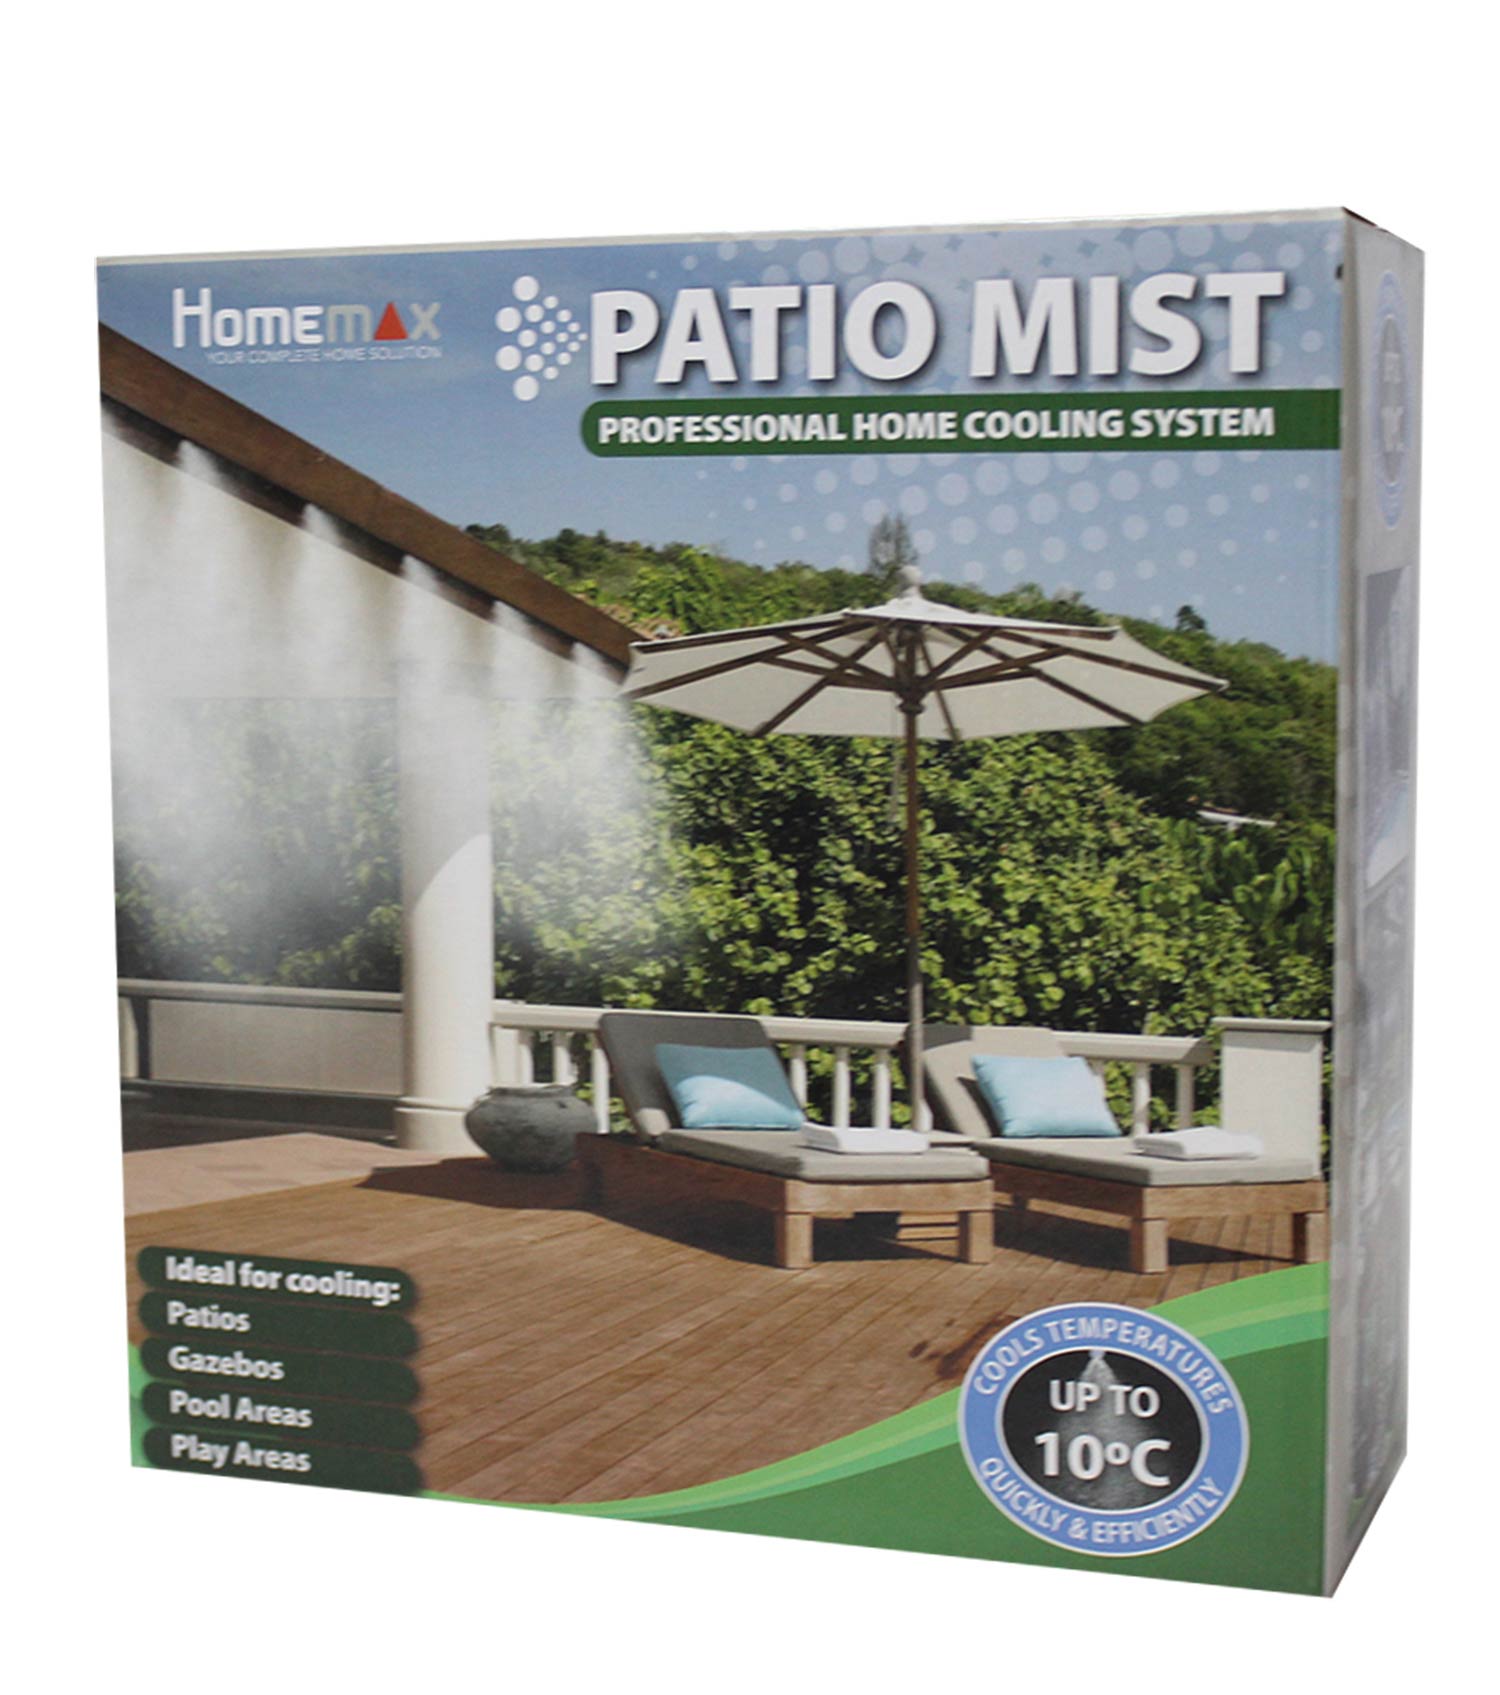 Homemax Patio Mist Home Cooling System